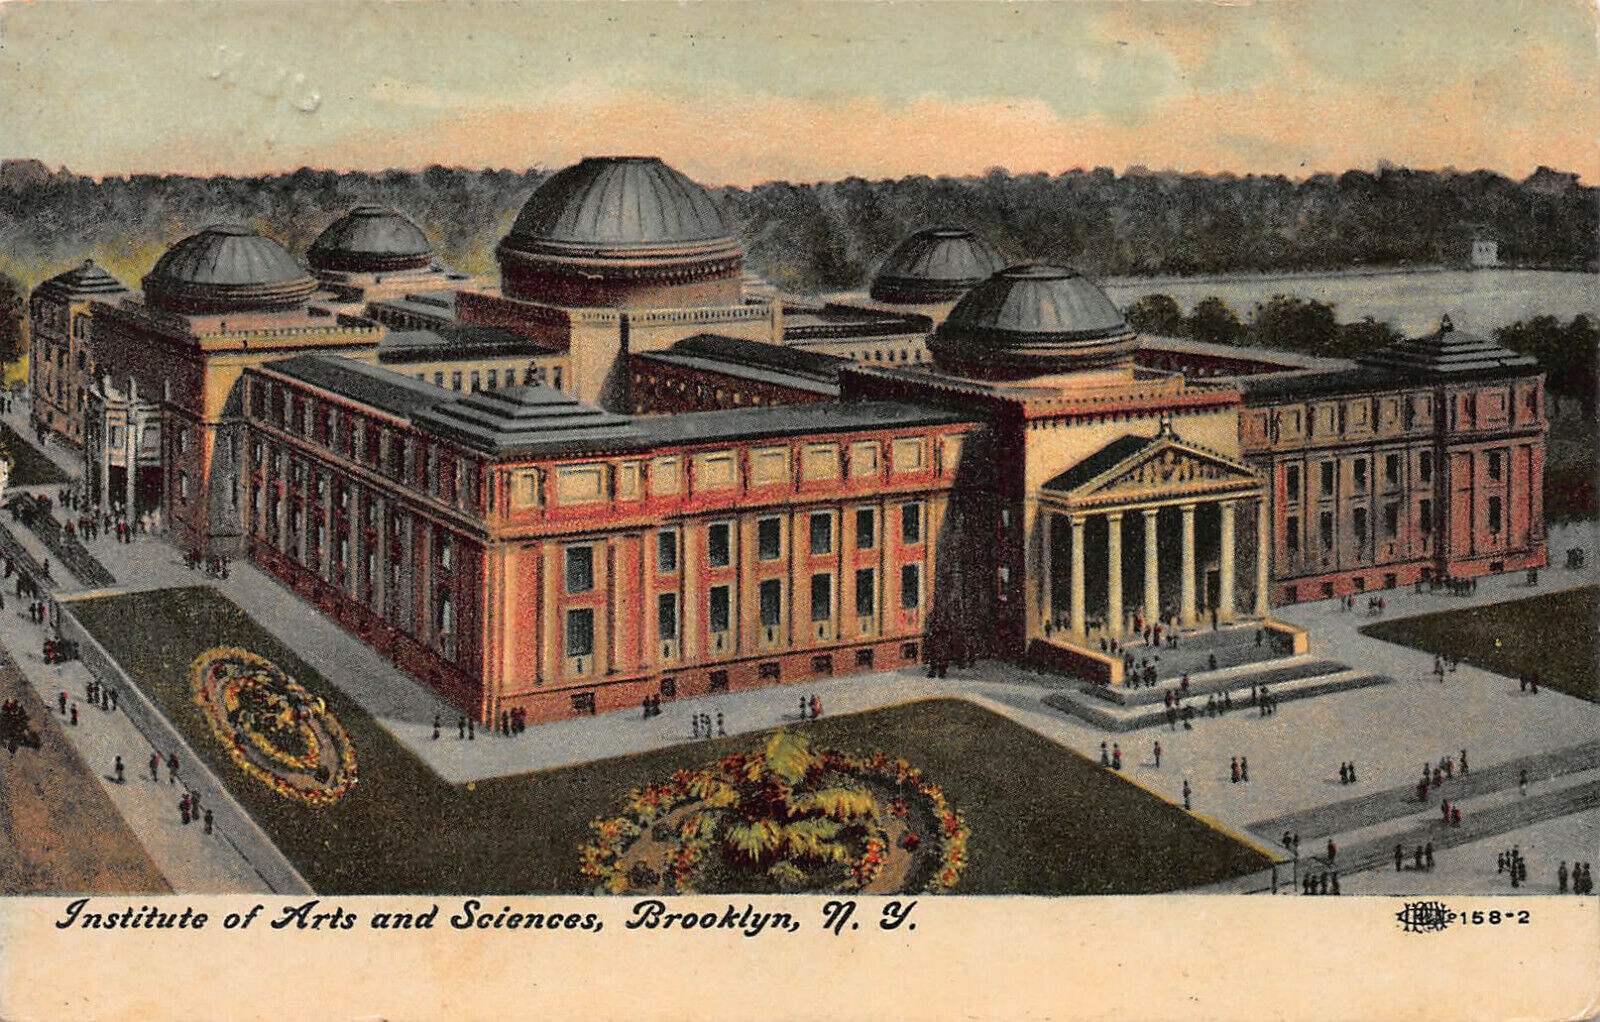 Institute of Arts and Sciences, Brooklyn, N.Y., early postcard, used in 1912